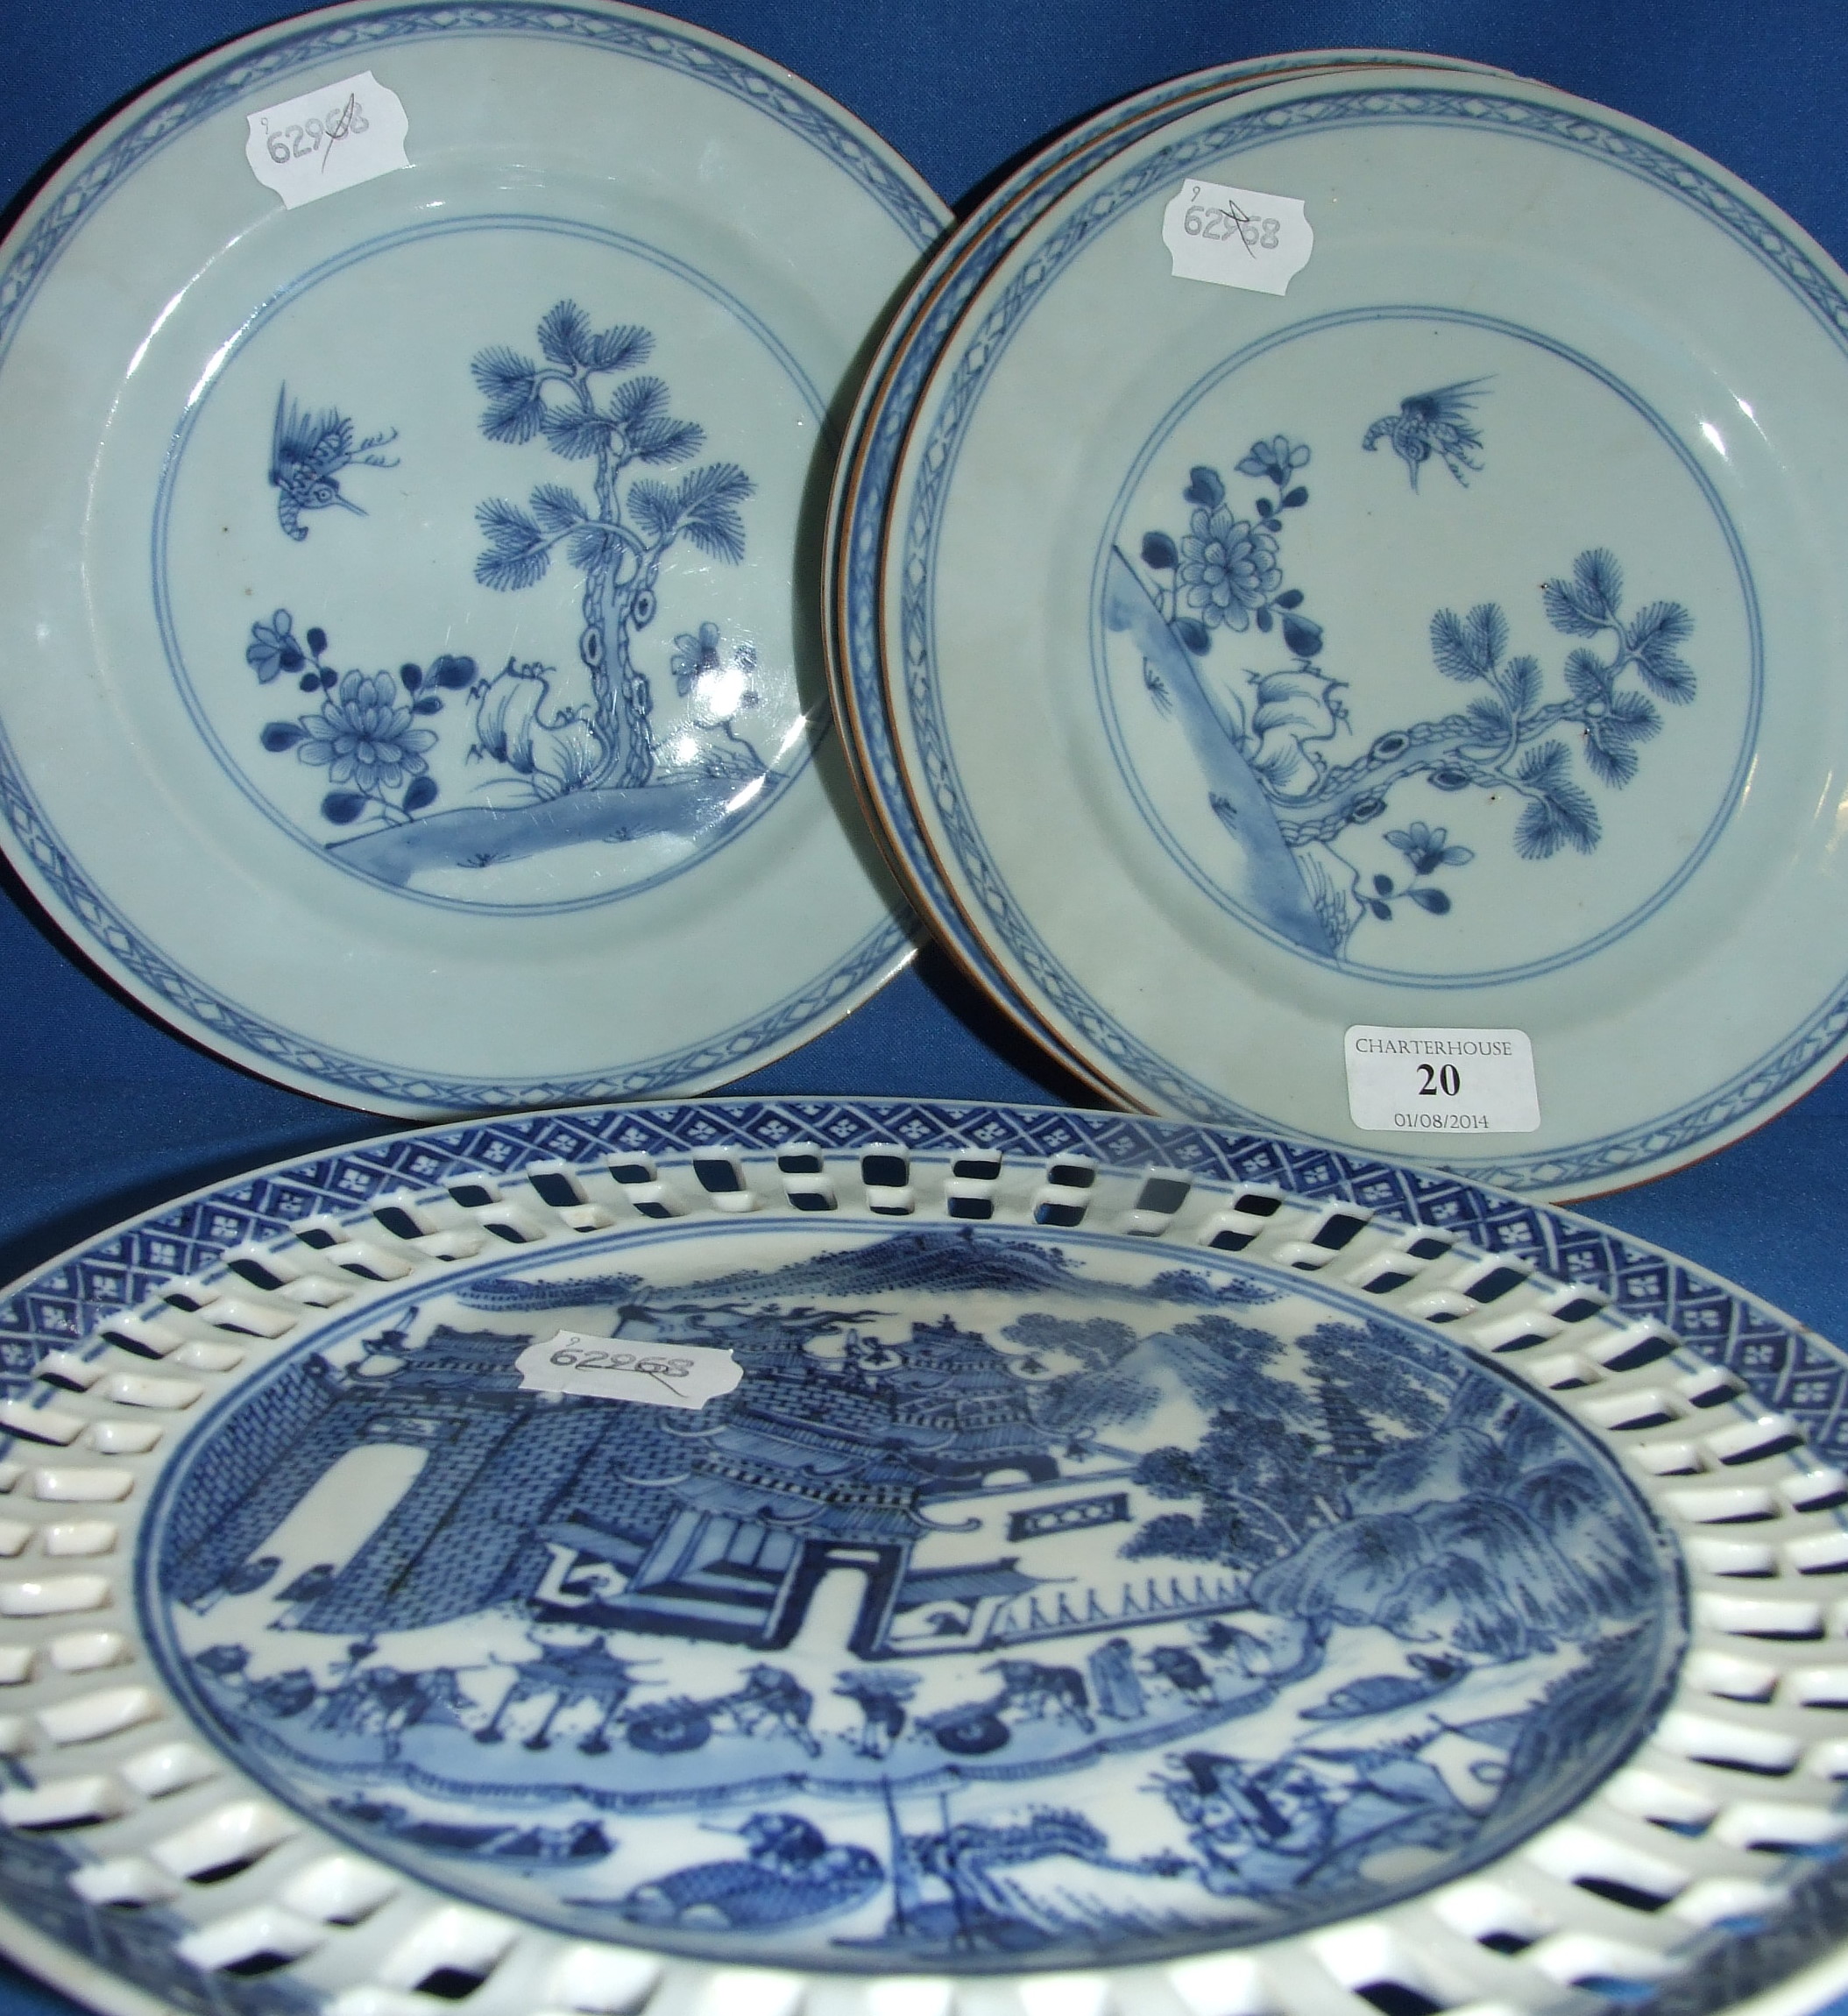 A set of four Chinese porcelain plates, with underglaze blue decoration, 23 cm diameter, and three